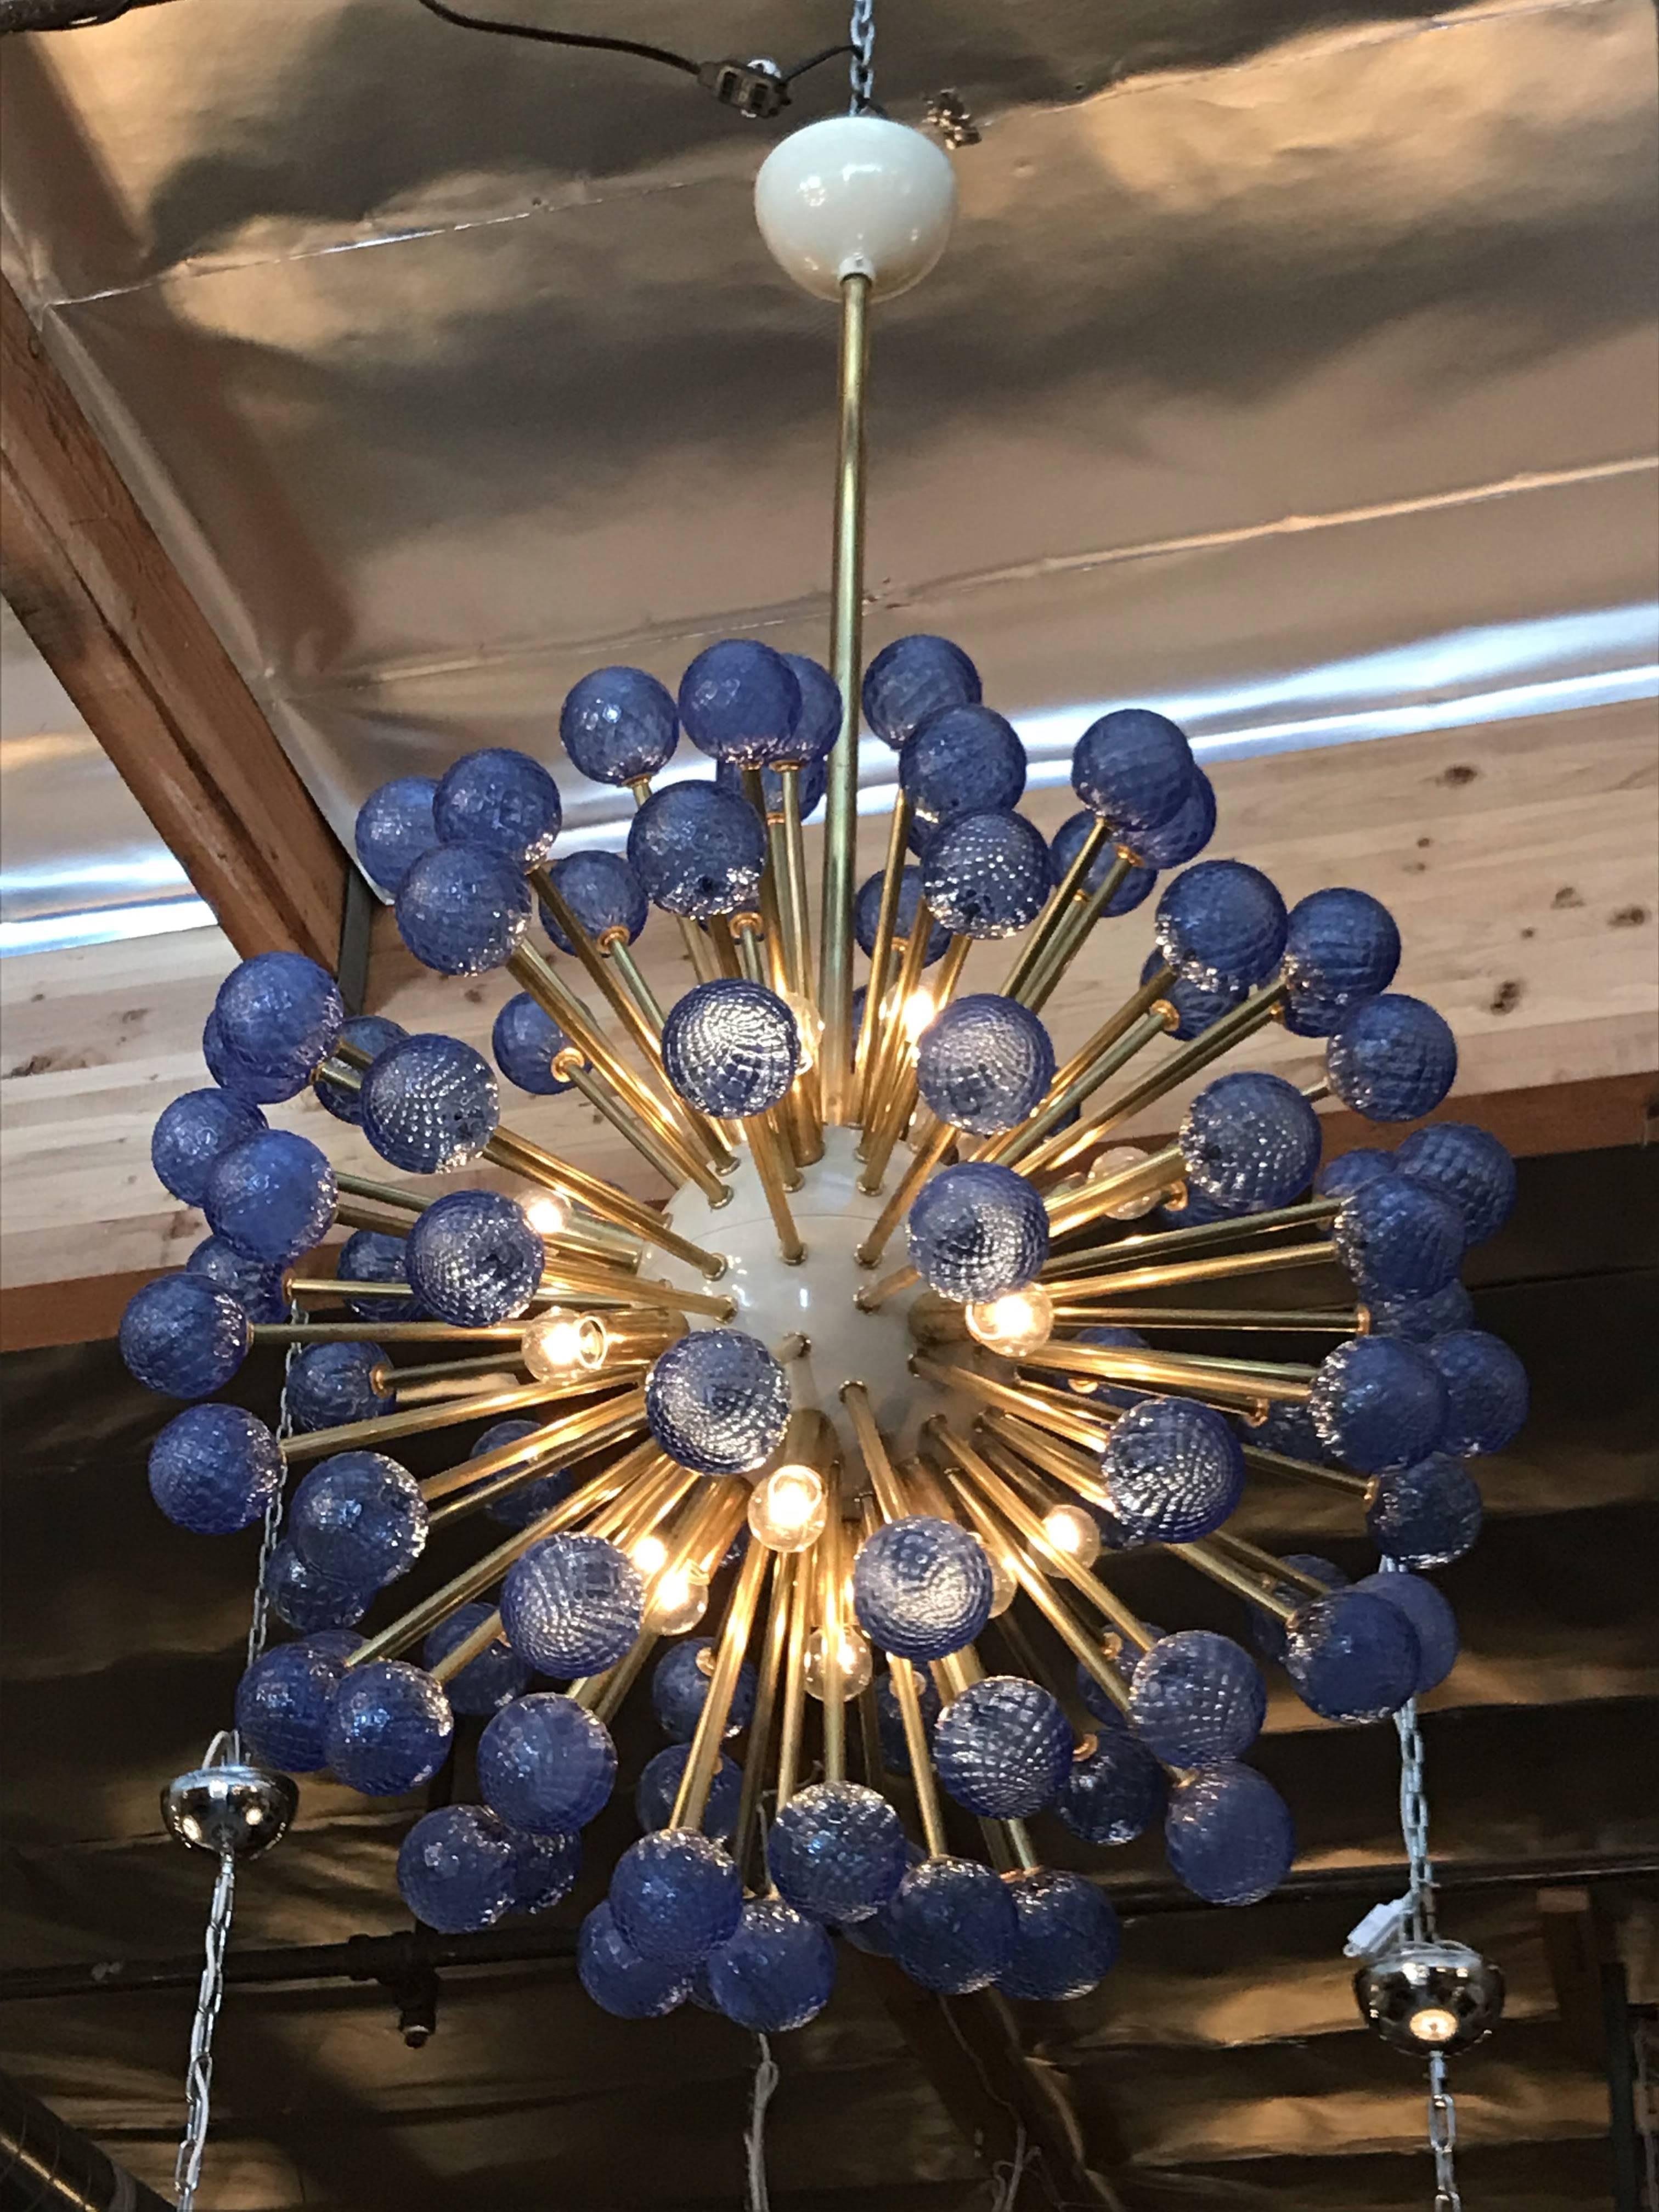 Italian modern Sputnik chandelier with blue Murano glass spheres, cream enameled centre and canopy, mounted on brass frame / Designed by Fabio Bergomi for Fabio Ltd / Made in Italy
16 lights / E12 or E14 type / max 40W each
Height: 50 inches